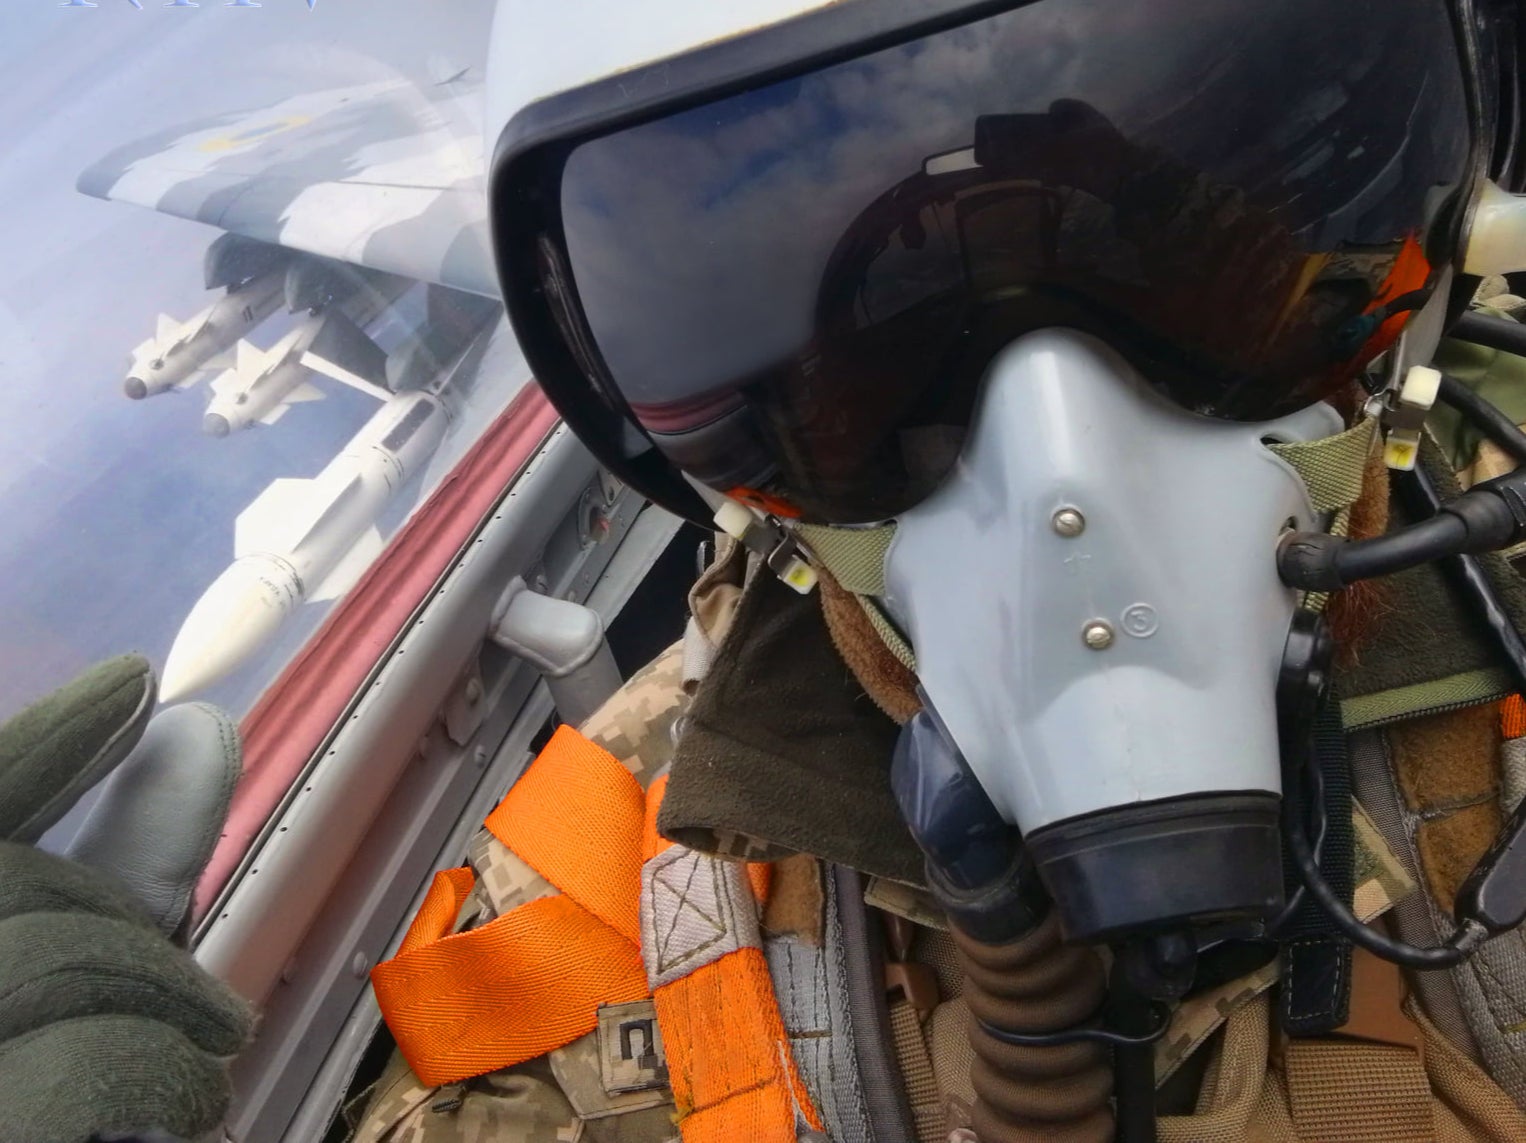 The fighter pilot’s face is completely obscured by his gear